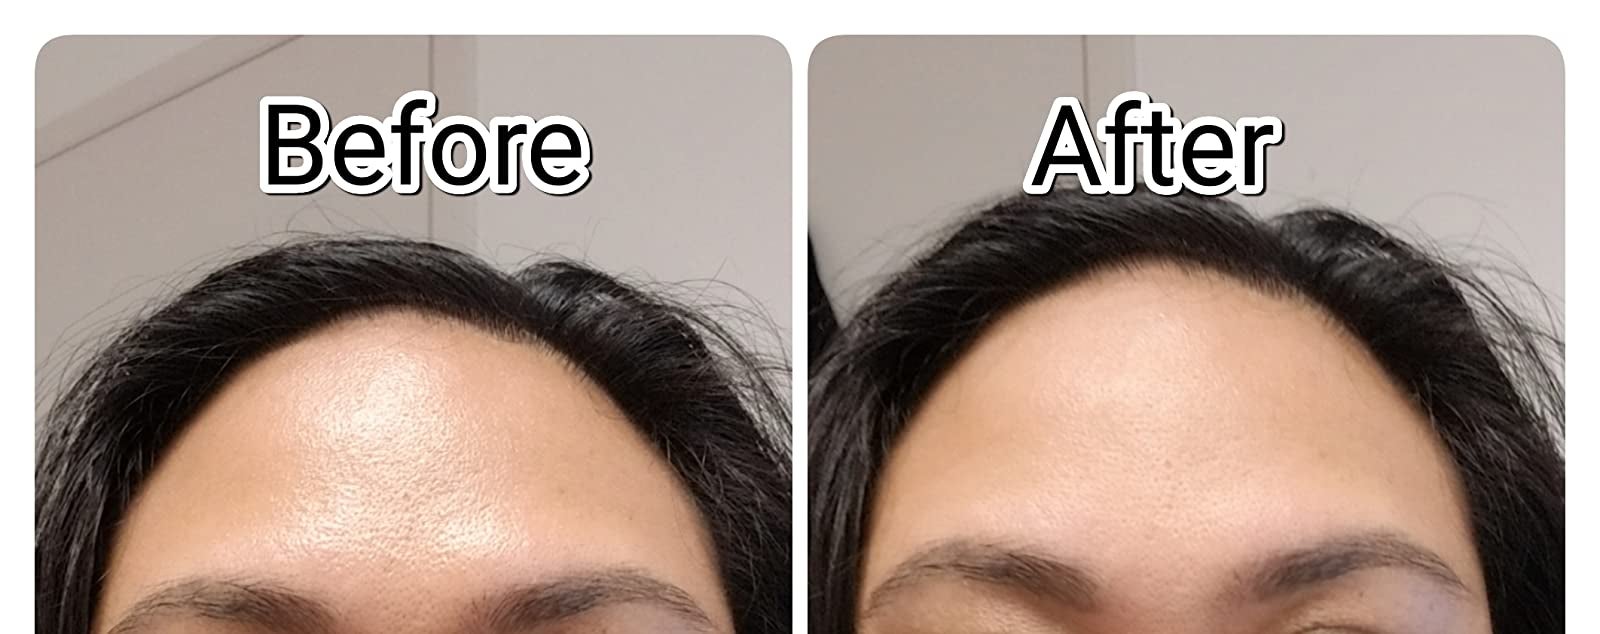 on the left, a reviewer's shiny forehead labeled 